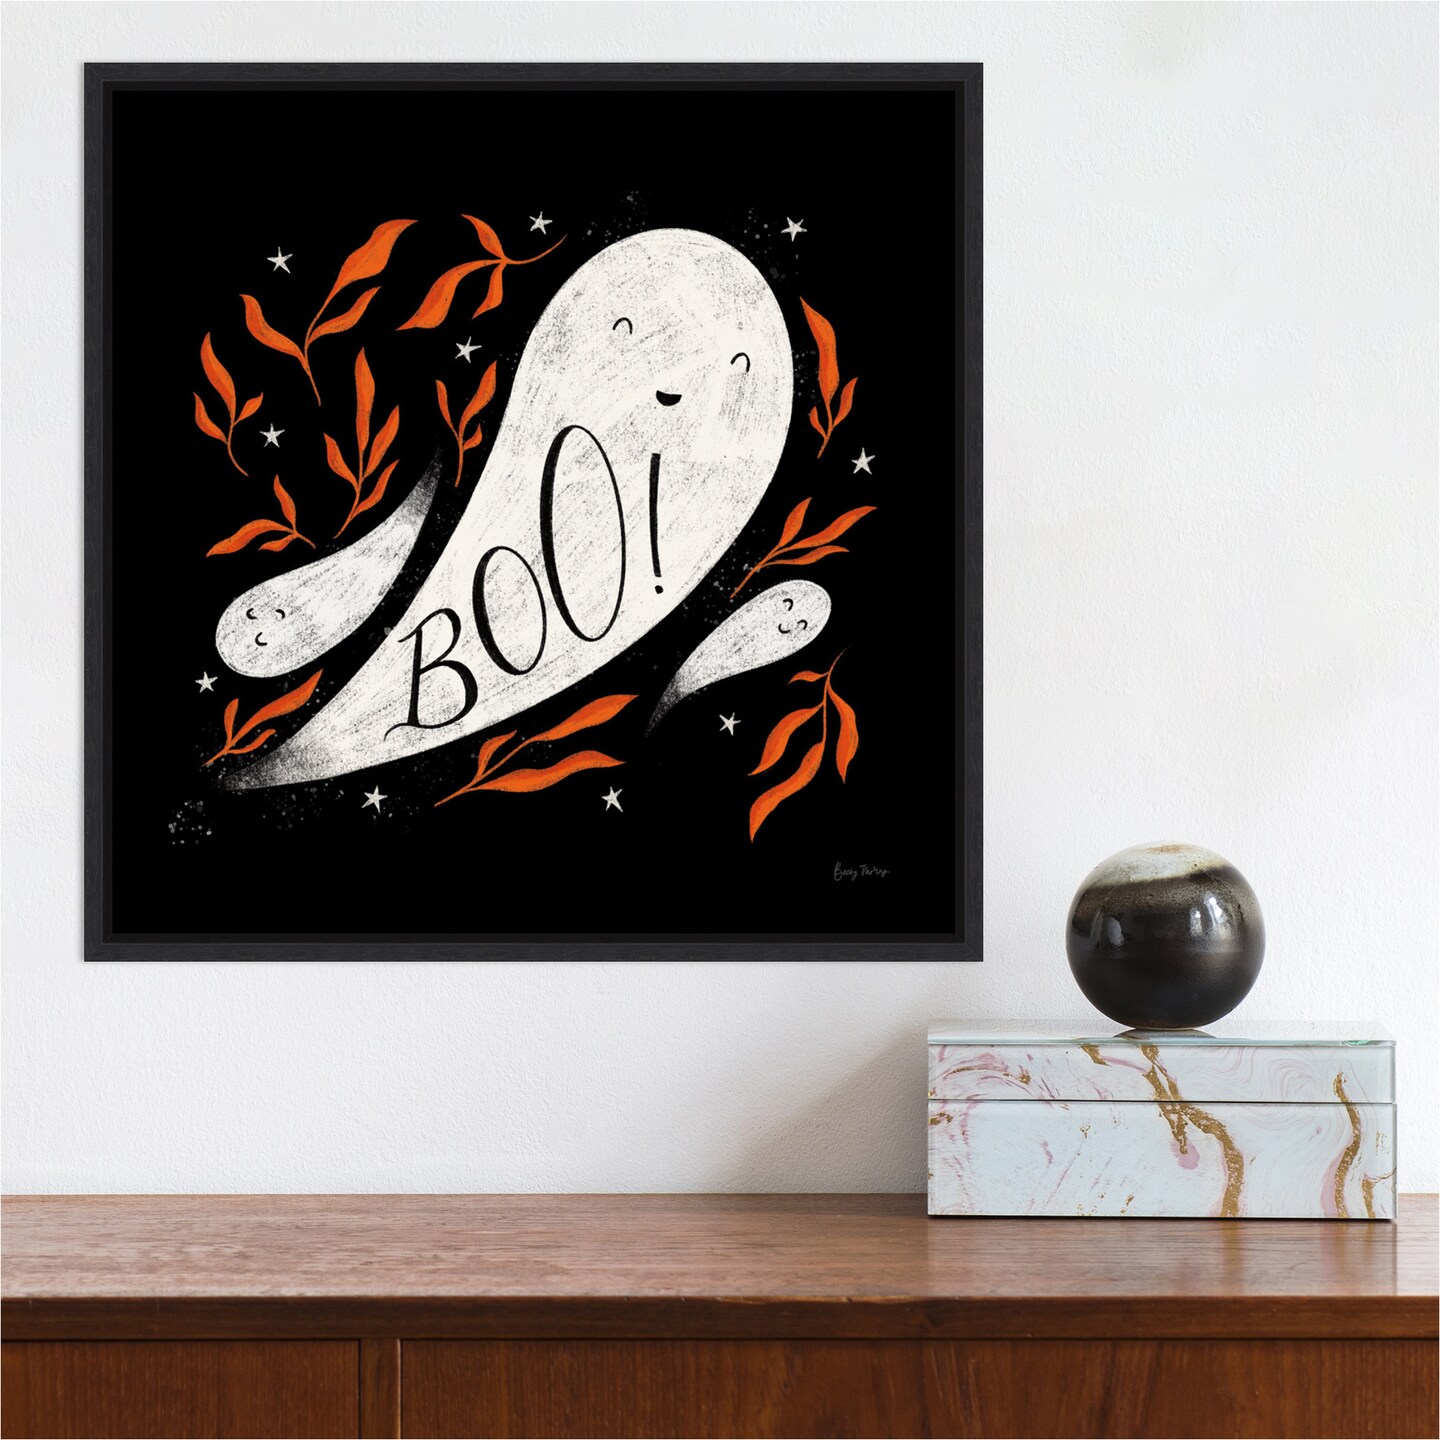 Cute Halloween III by Becky Thorns 16-in. W x 16-in. H. Canvas Wall Art Print Framed in Black